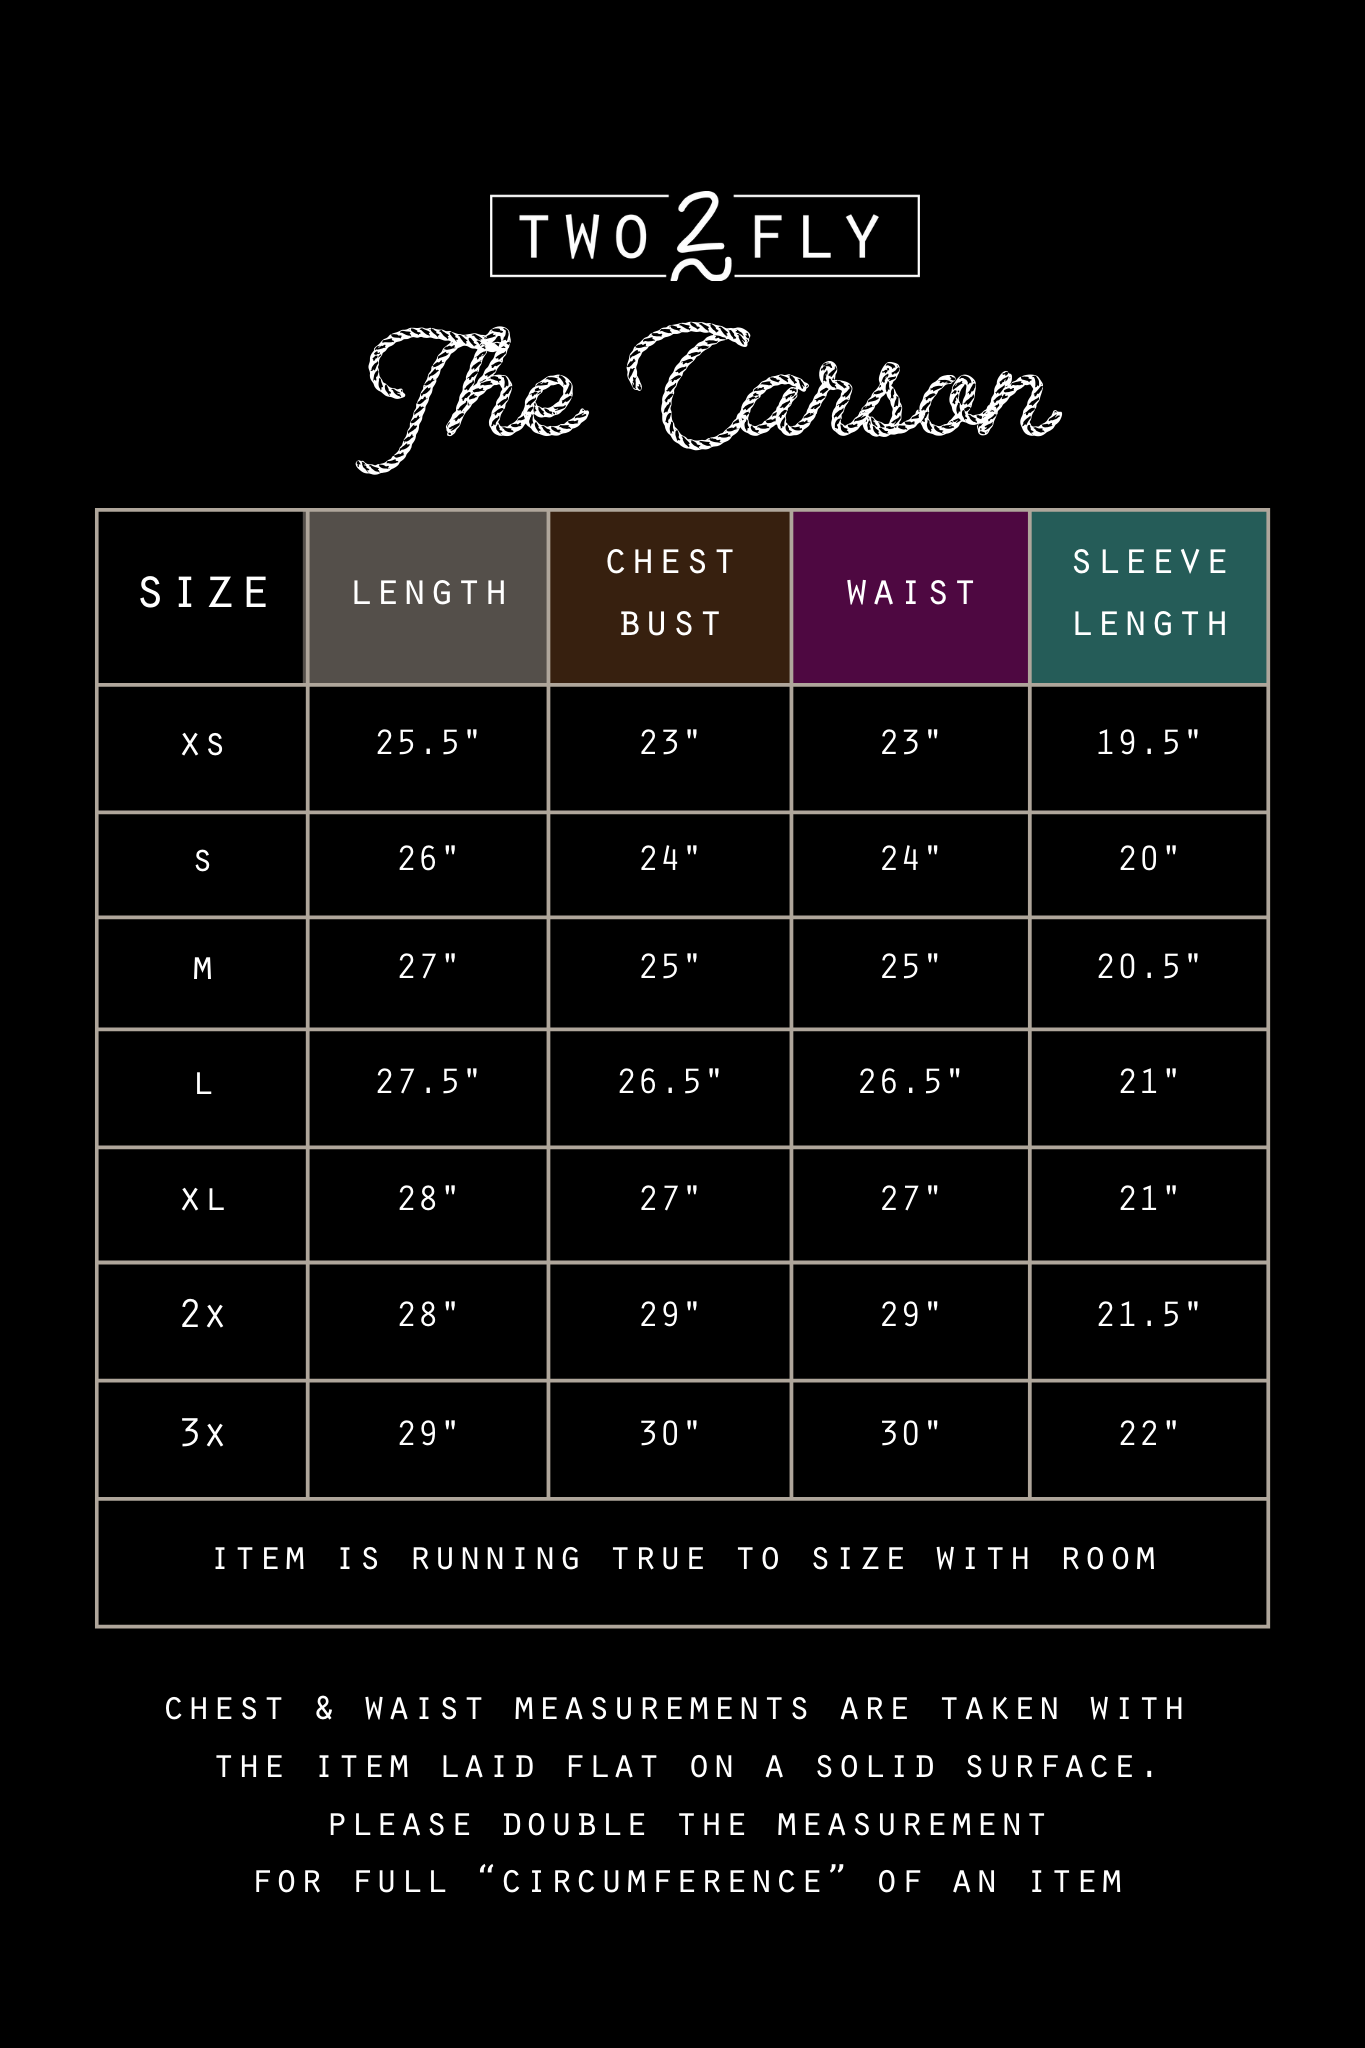 THE CARSON [XL & 3X ONLY]